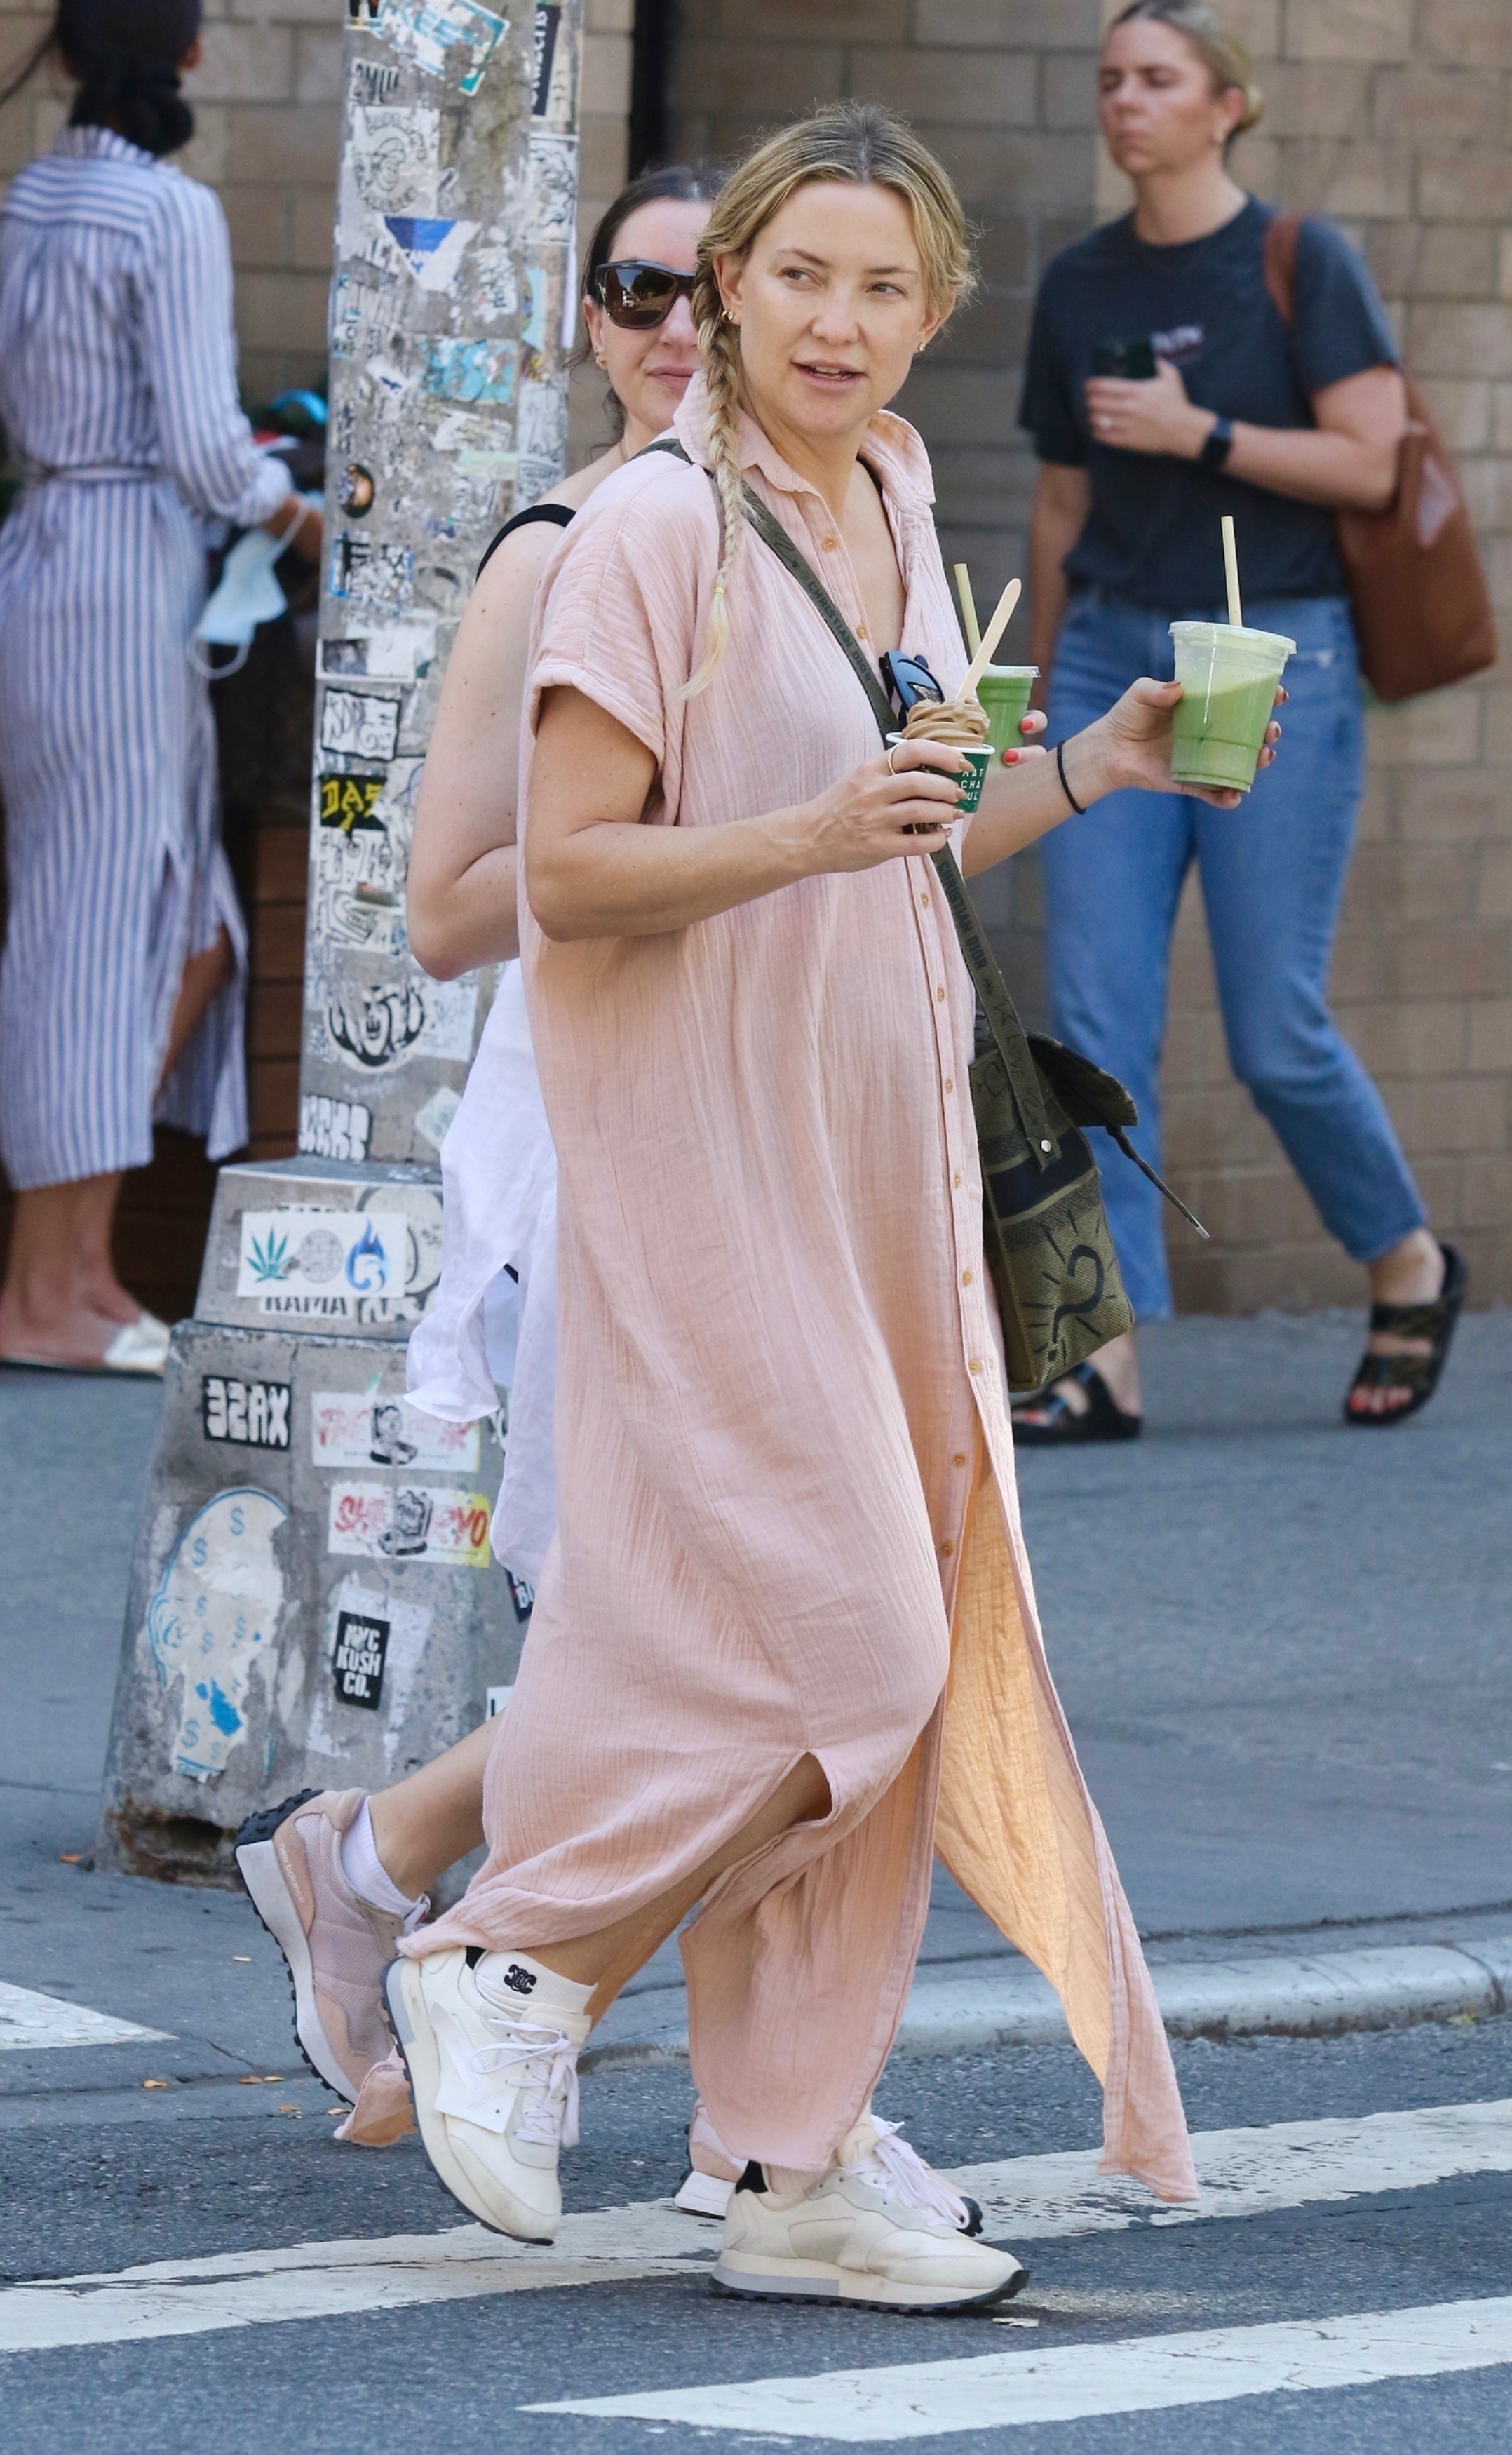 Kate Hudson took a walk through the streets of the Soho neighborhood in New York, accompanied by a friend, with whom she stopped to buy a juice to go.  She wore a long pink dress with buttons and short sleeves.  She also wore comfortable sneakers, sunglasses and a shoulder bag.